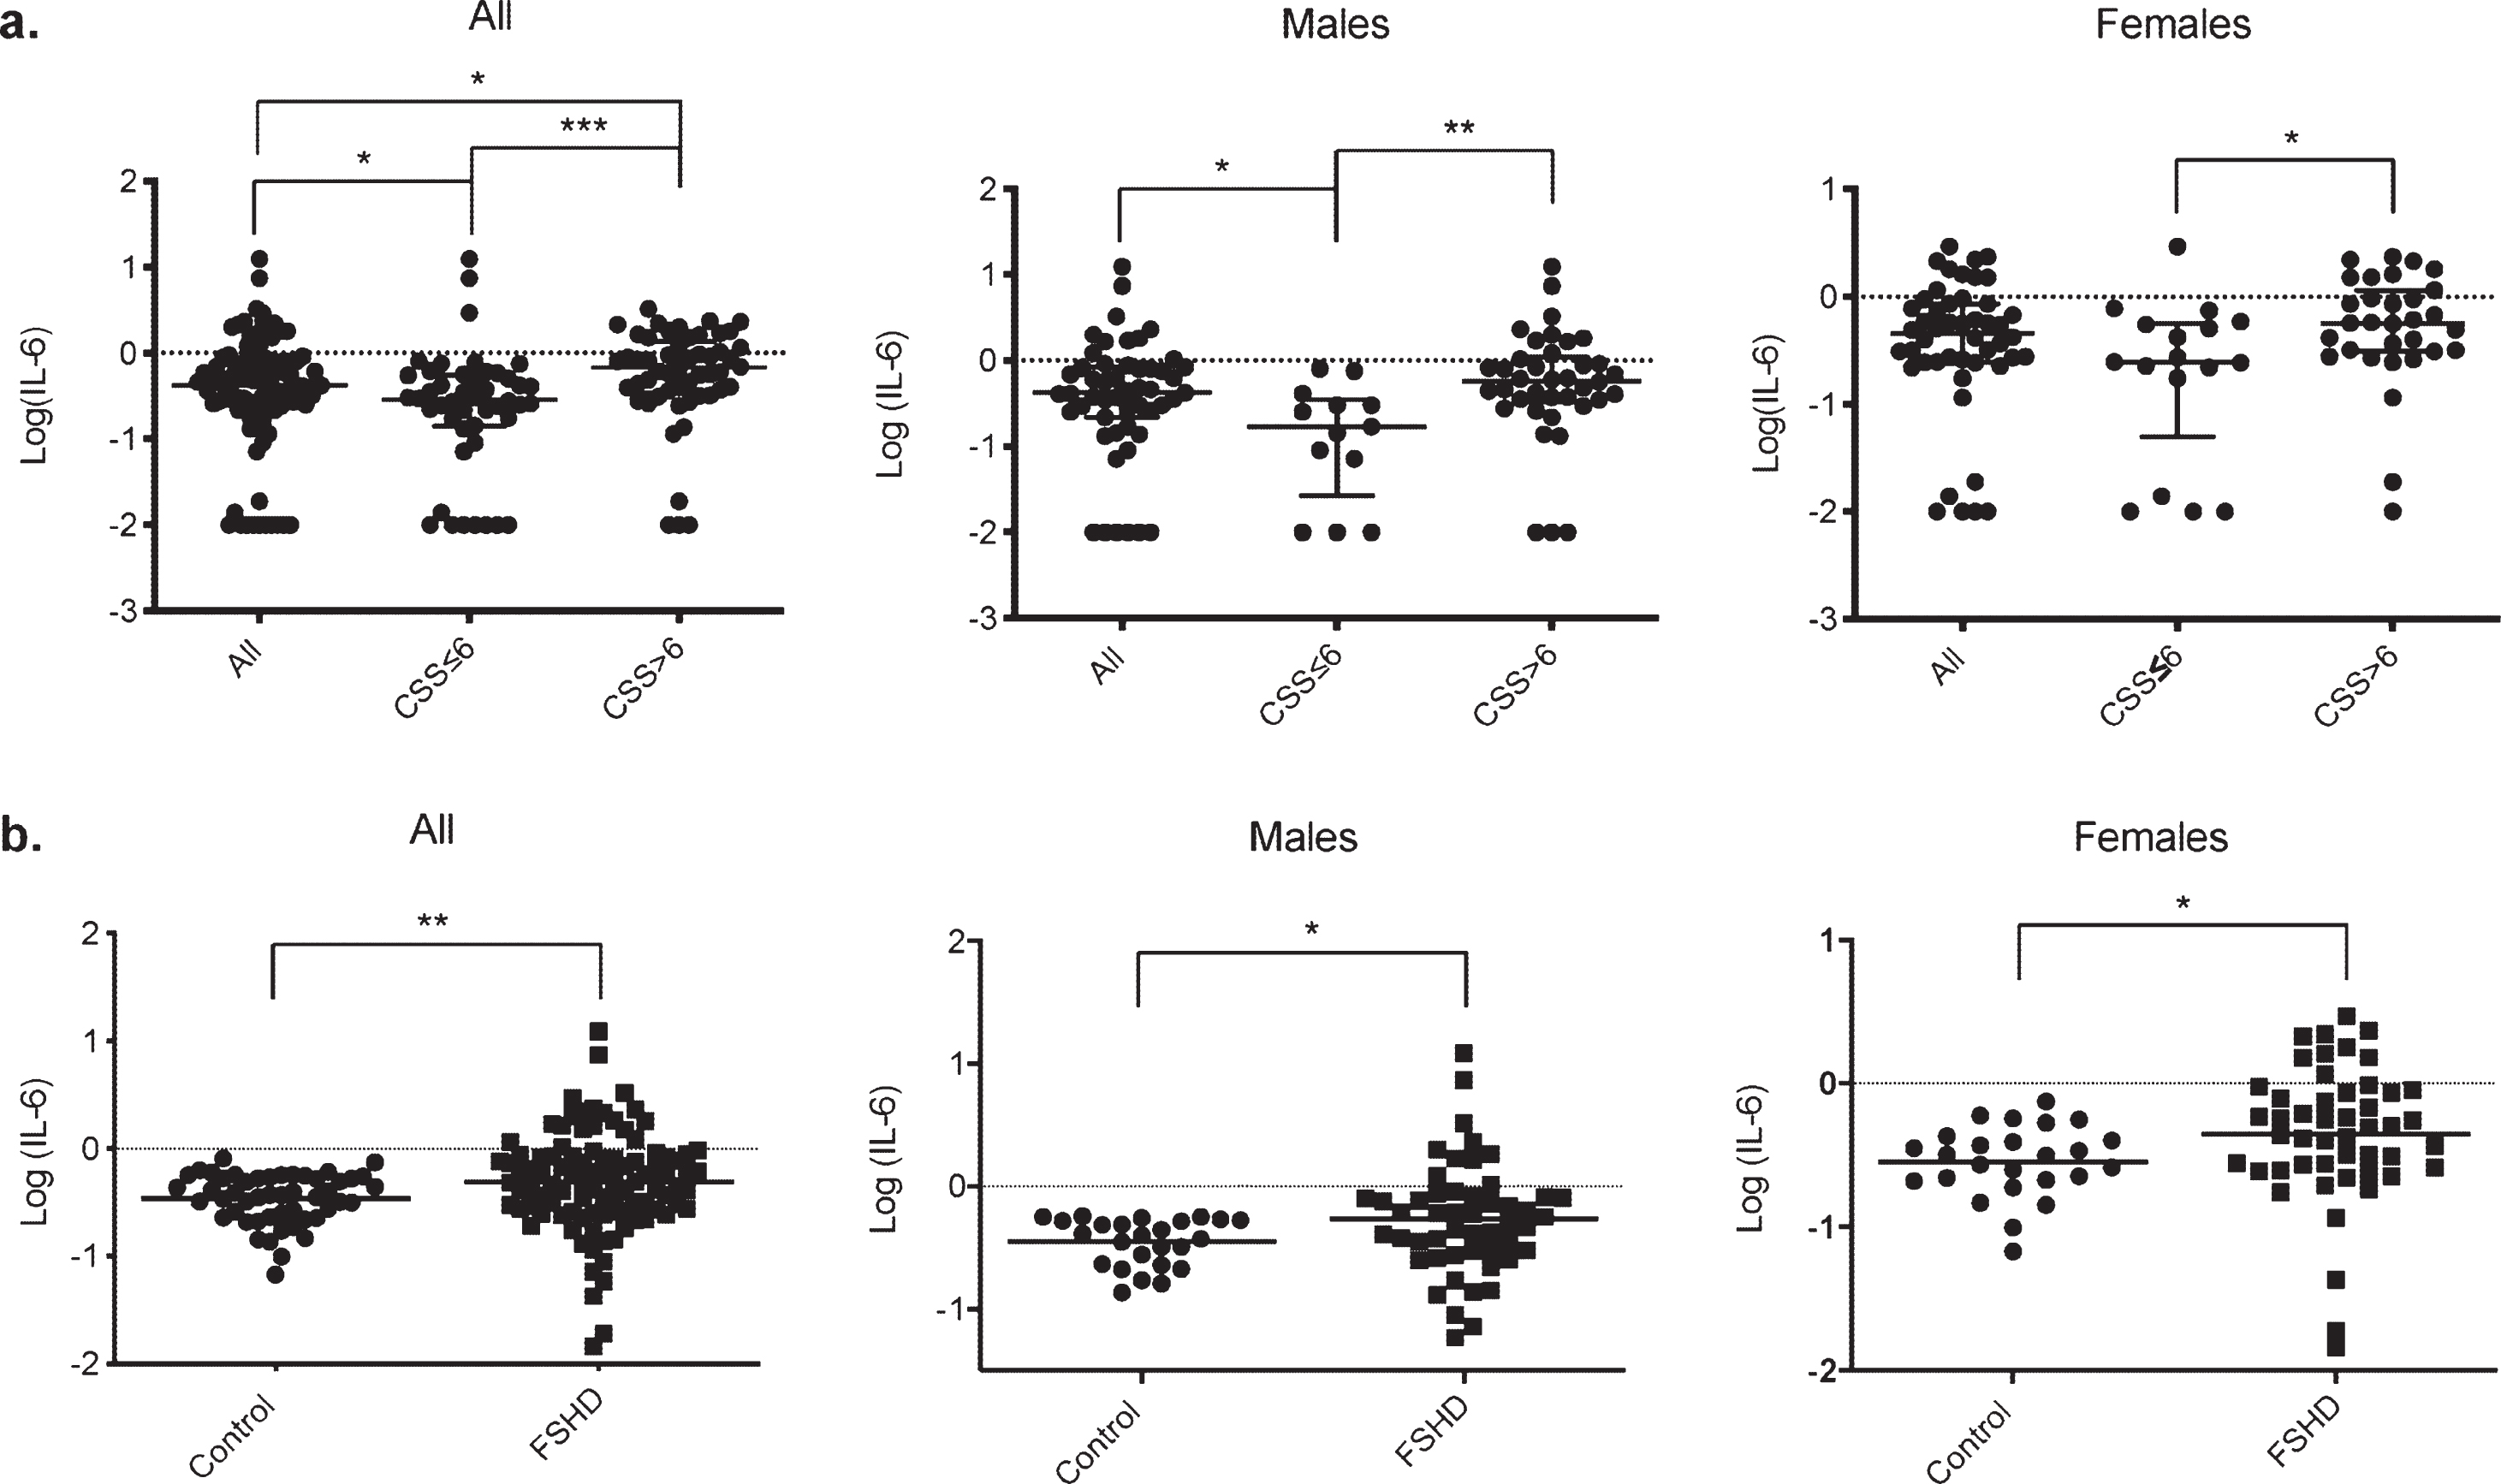 Comparison of serum IL-6 levels with clinical severity in FSHD1 and with control. a. Scatter plot representation of serum IL-6 levels in the different groups according to clinical severity. A significant difference in serum IL-6 levels was obtained between patients with a CCS≤6 and or > 6 in the overall population (p < 0.0001****), in males (p = 0.0016**) and in females (p = 0.015*). b. Scatter plot representation of serum IL-6 levels in the control and FSHD1 patient. A significant difference in serum IL-6 levels was obtained between control and patients in the overall population (p = 0.006**), in males (p = 0.027*), and in females (p = 0.011*).